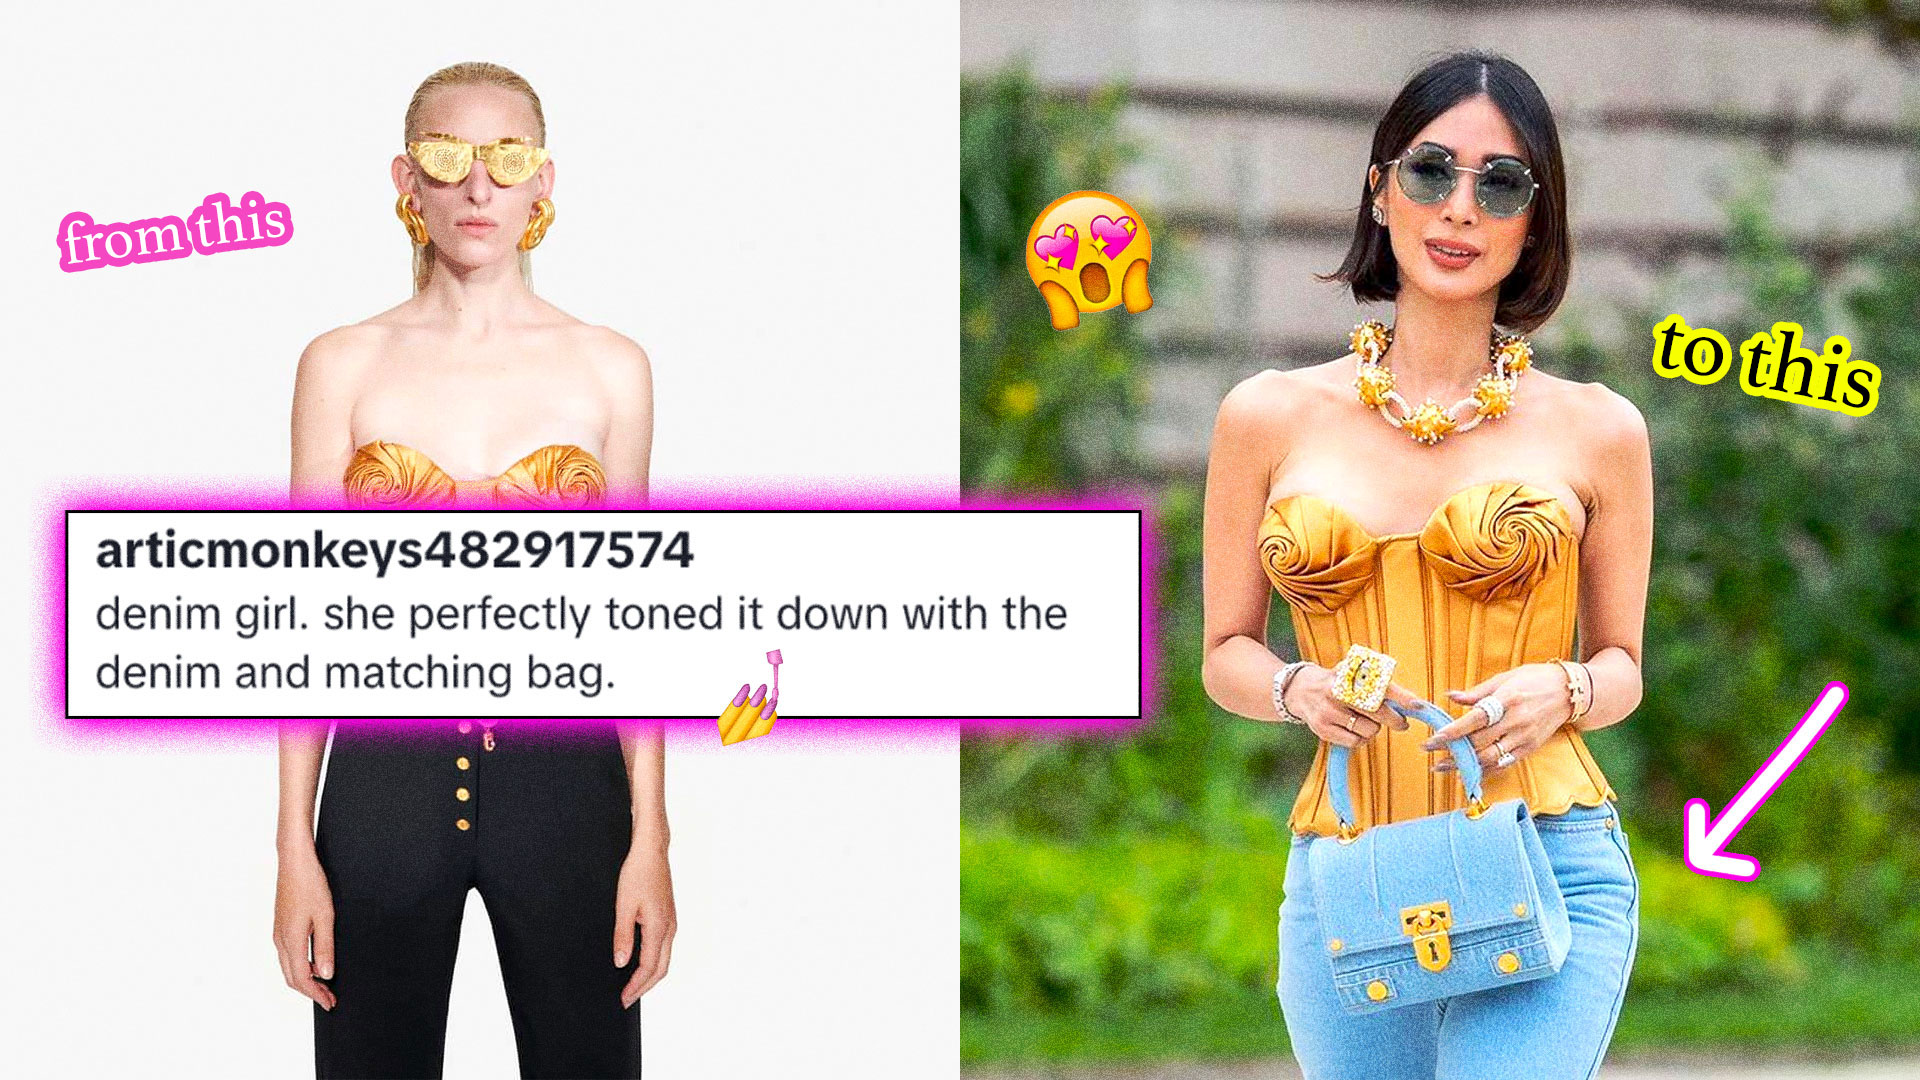 After Heart Evangelista wore it, this pair of YSL sunglasses is